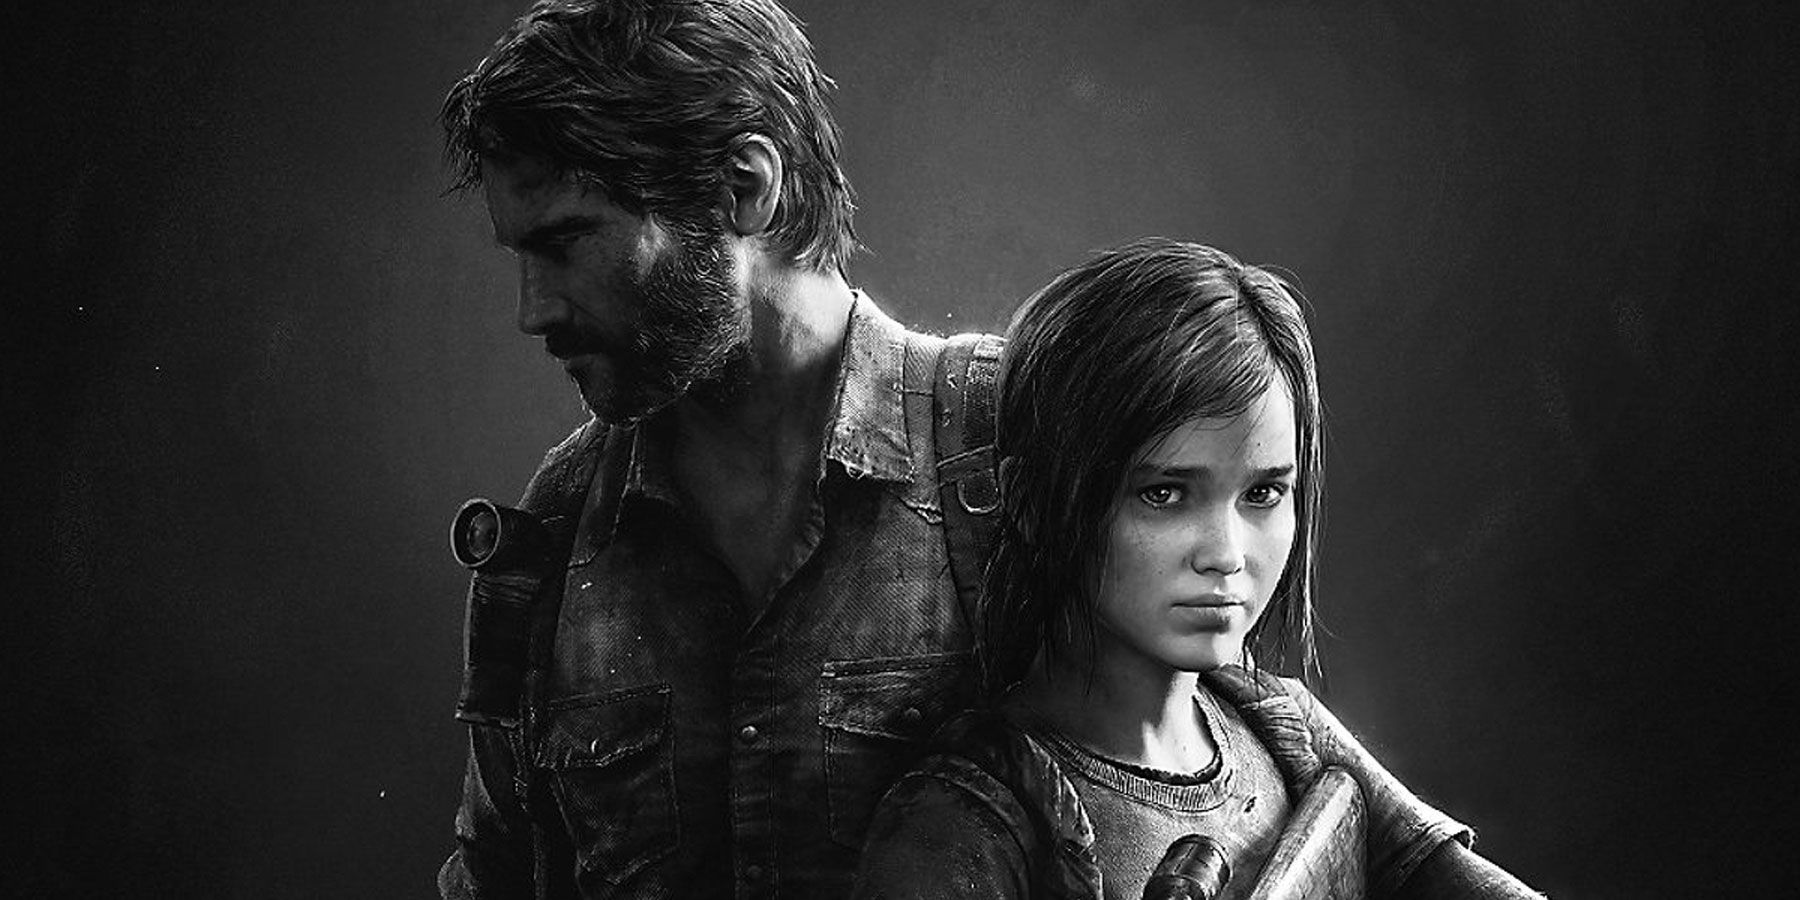 Should HBO recast Ellie for The Last of Us Part 2